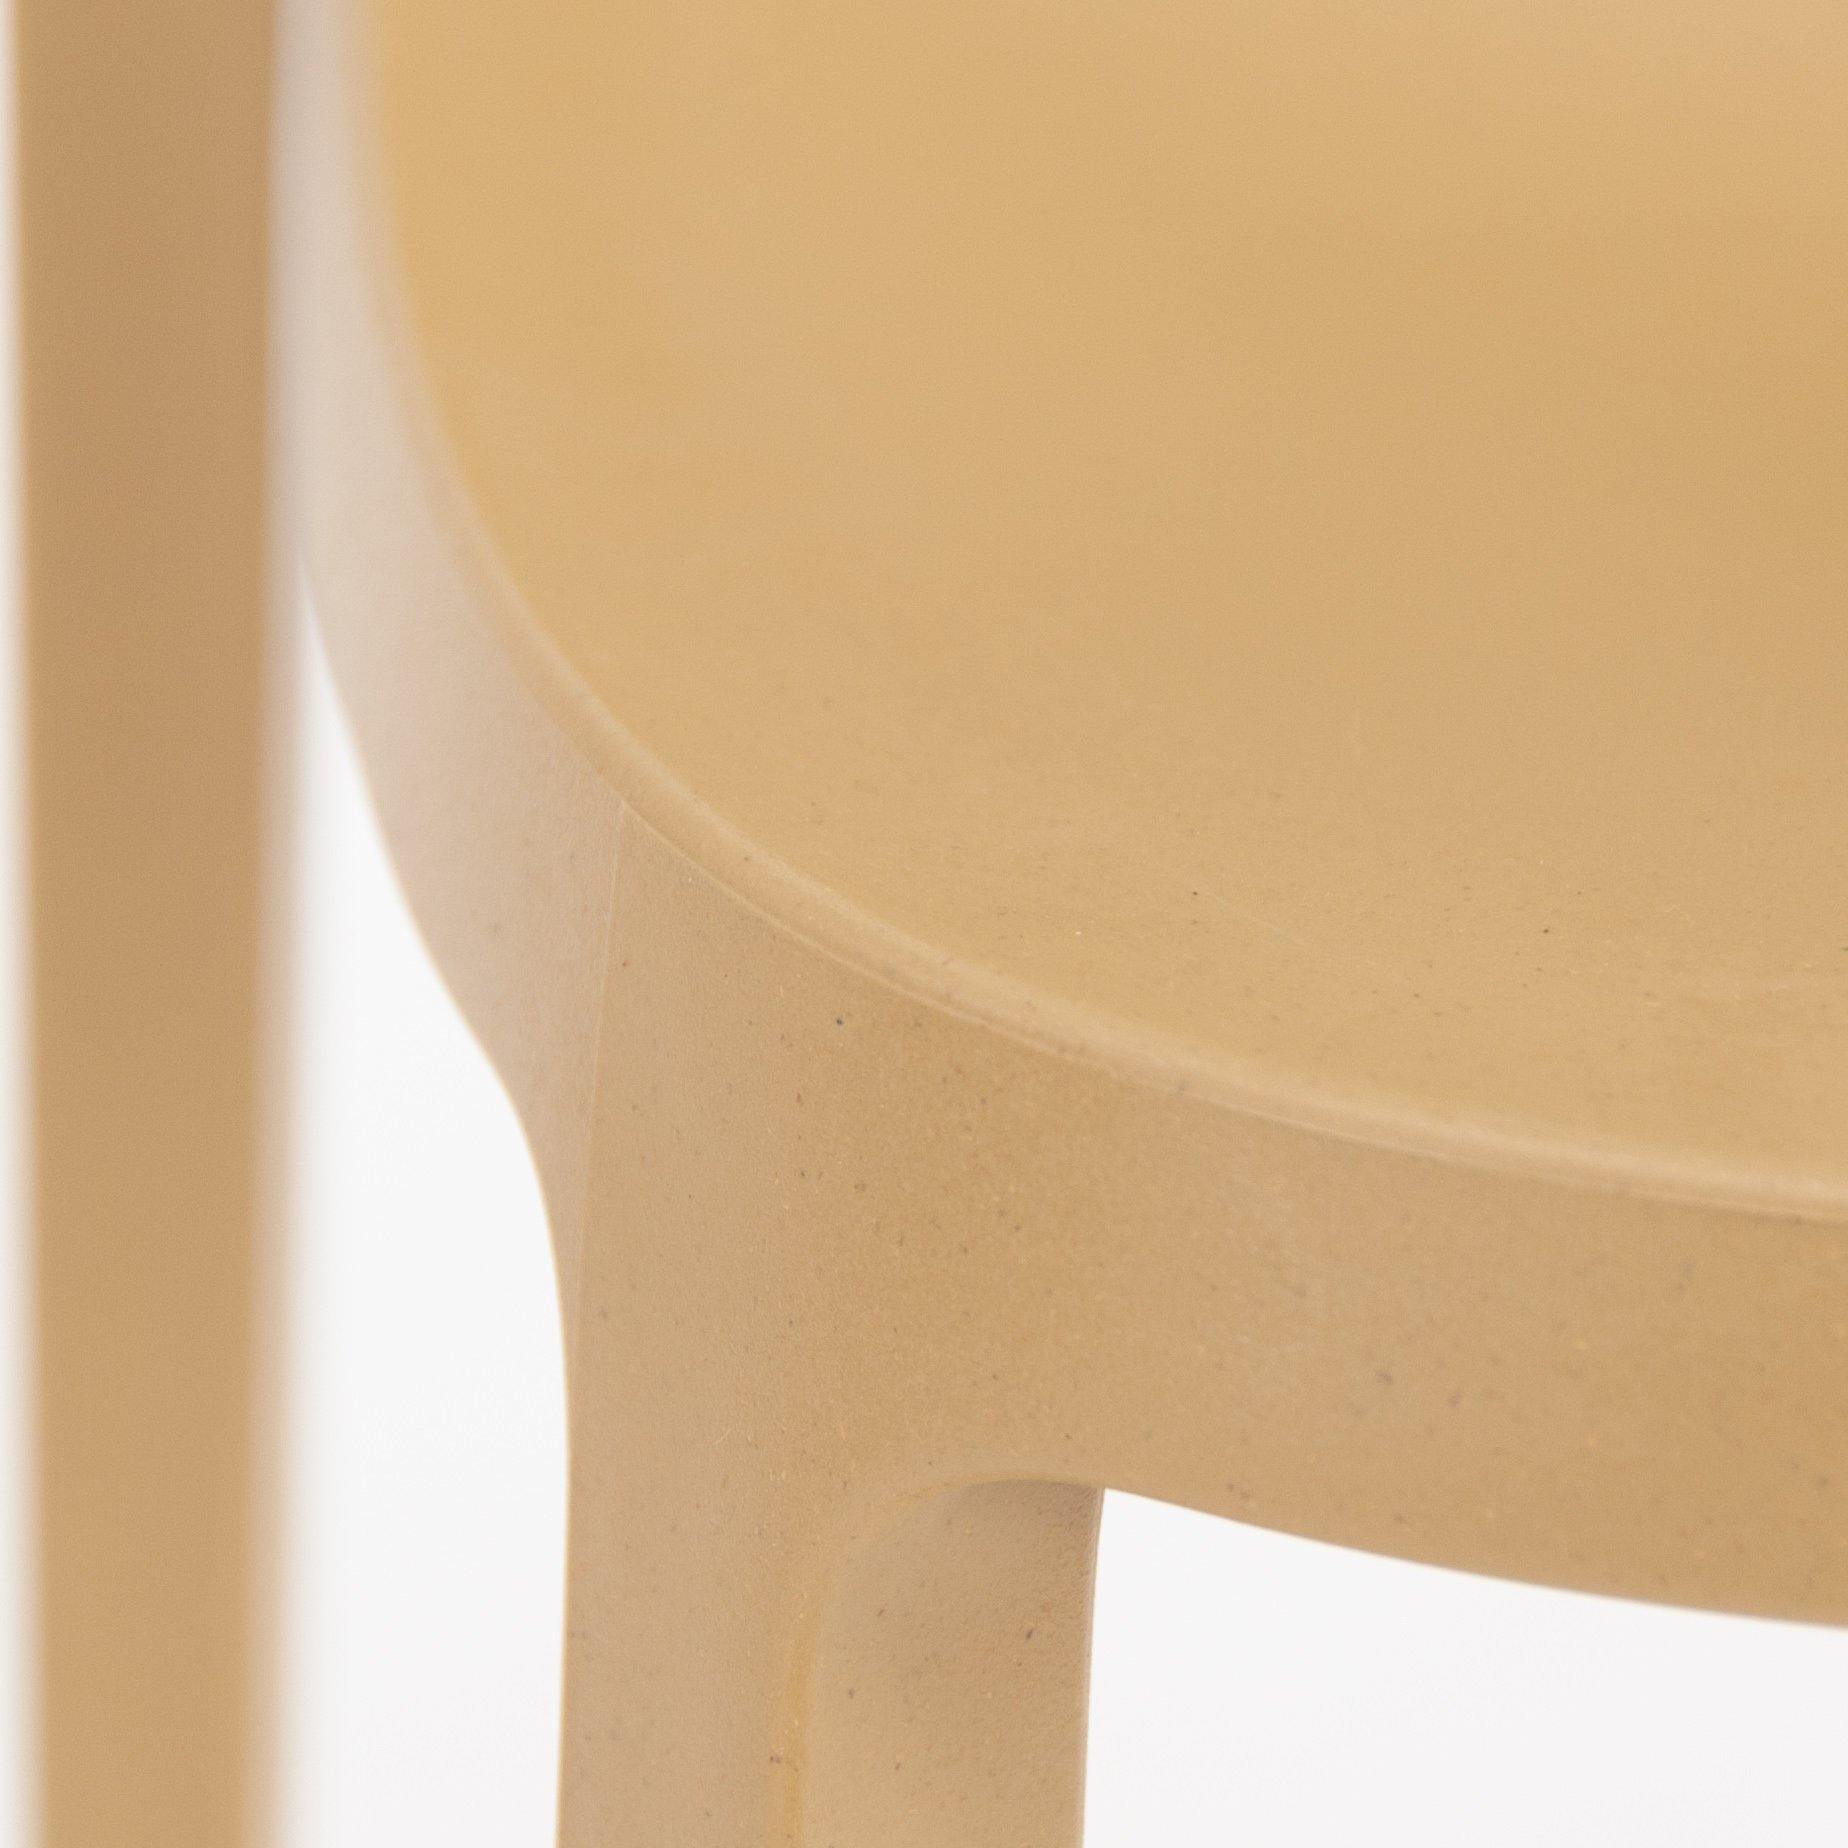 Philippe Starck for Emeco Broom Stacking Dining / Side Chair - Rarify Inc.